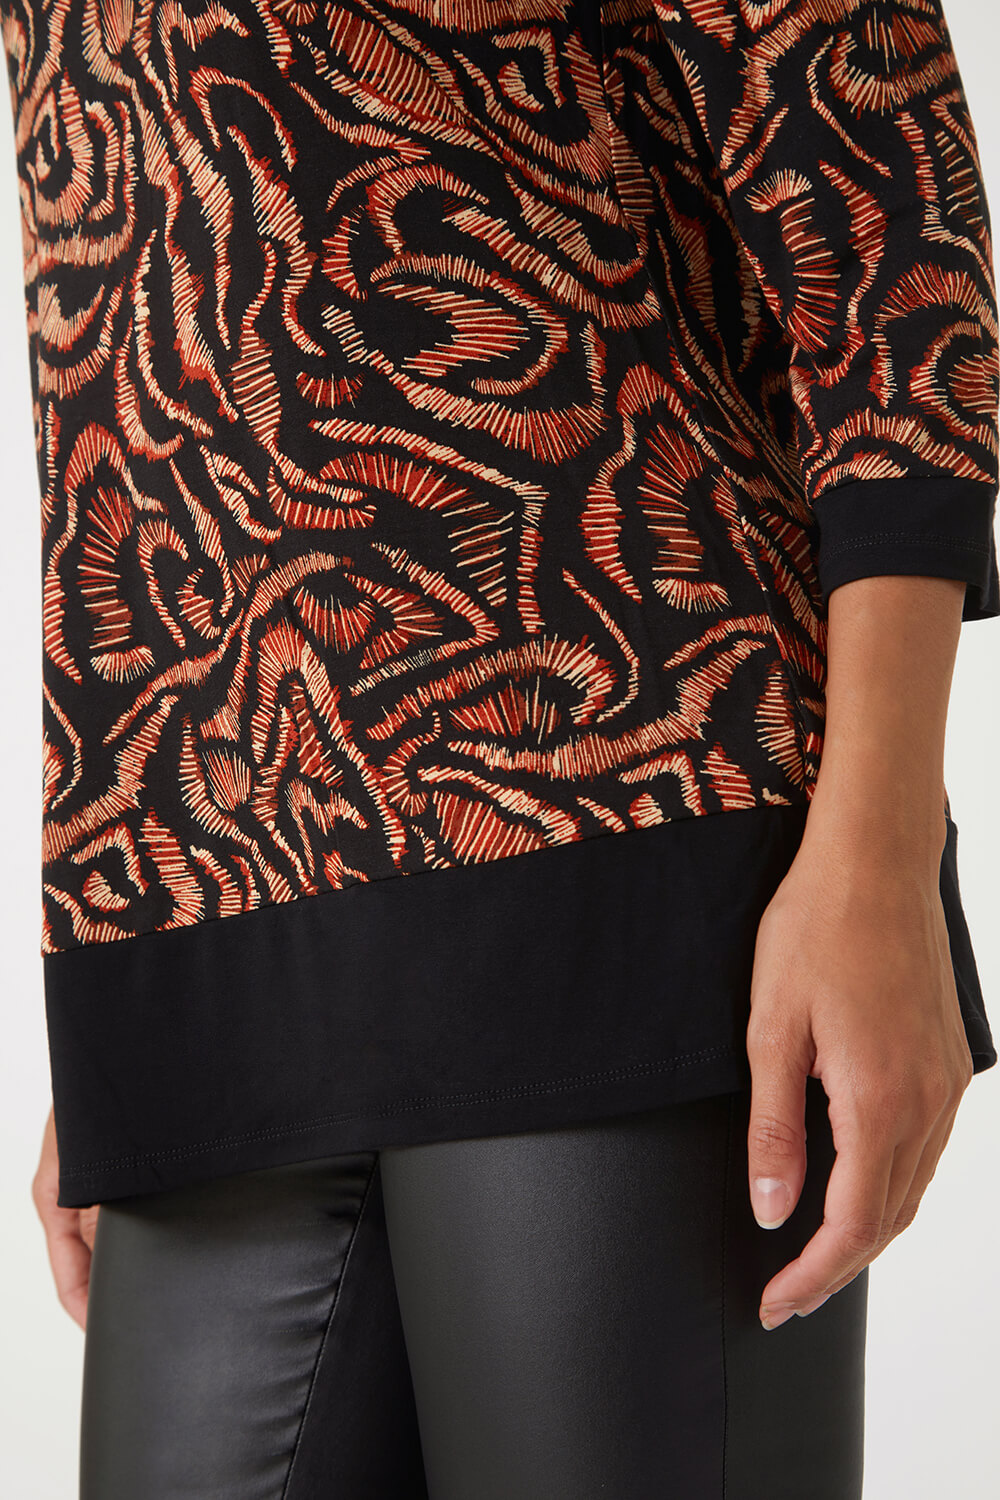 Rust Abstract Contrast Hem Stretch Top, Image 5 of 5